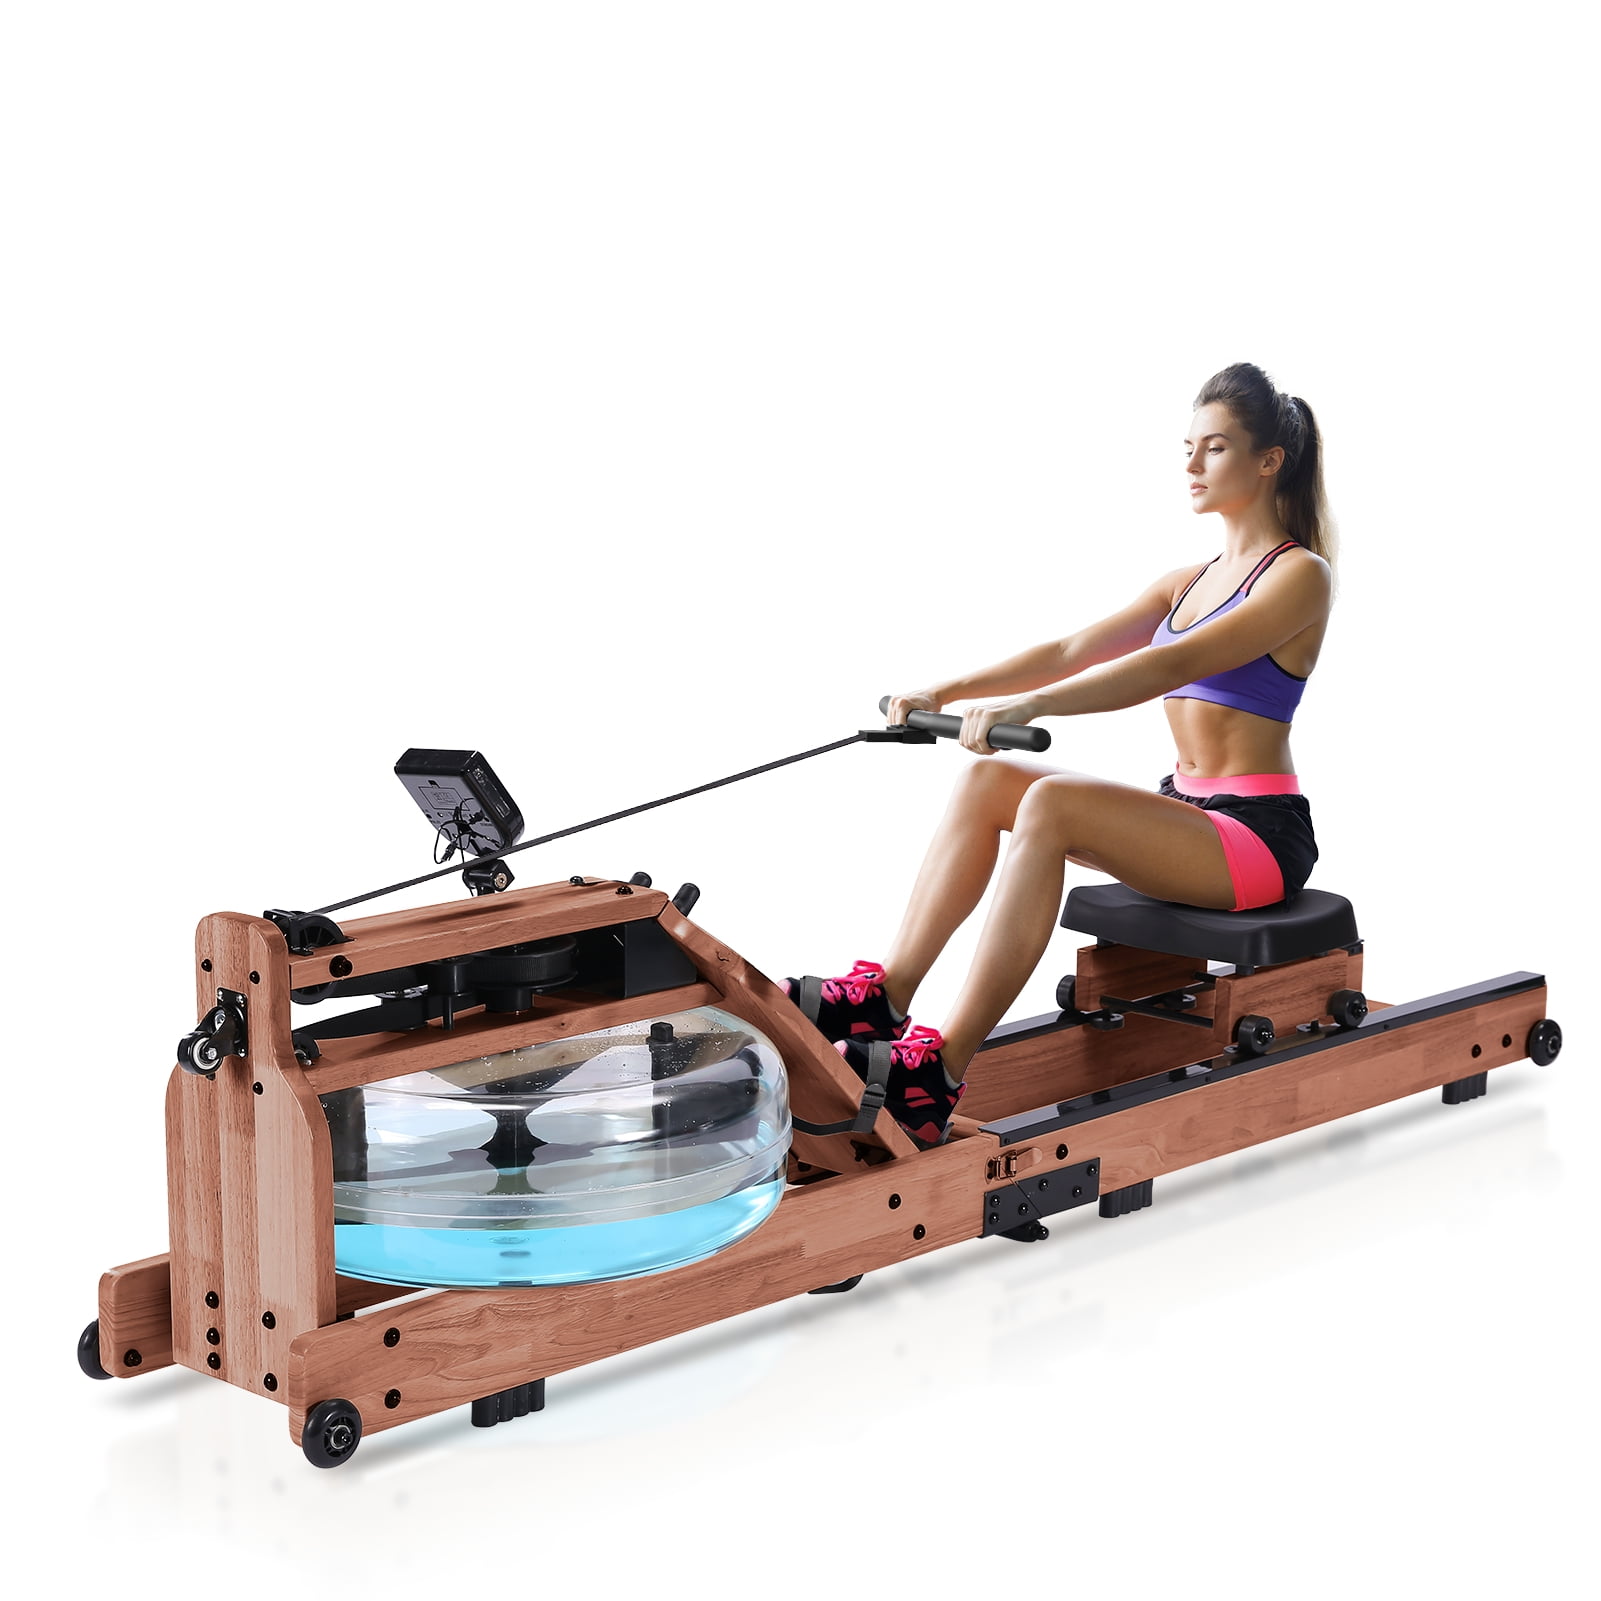 Wood Rower with Bluetooth Monitor,Indoor Cardio Training with Whole Body Exercise Included an Dust Cover and Phone Holder GYM ENERGY Foldable Water Rowing Machine for Home Gym Fitness 